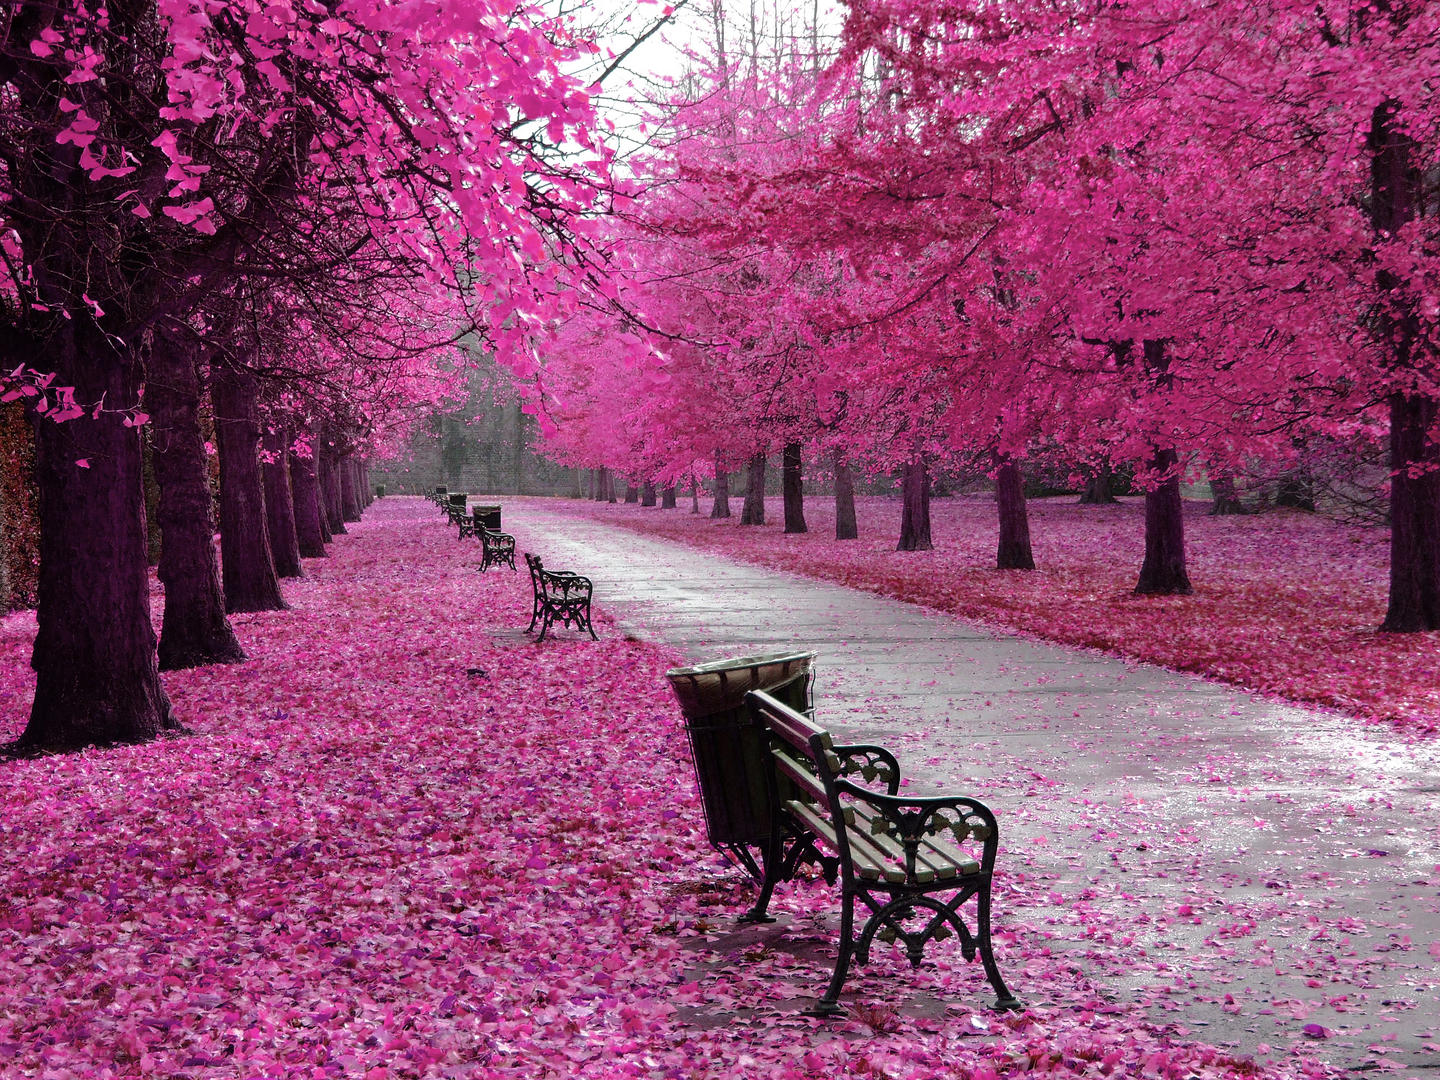 Pink in Nature - Nature photo contest | Photocrowd photo competitions ...